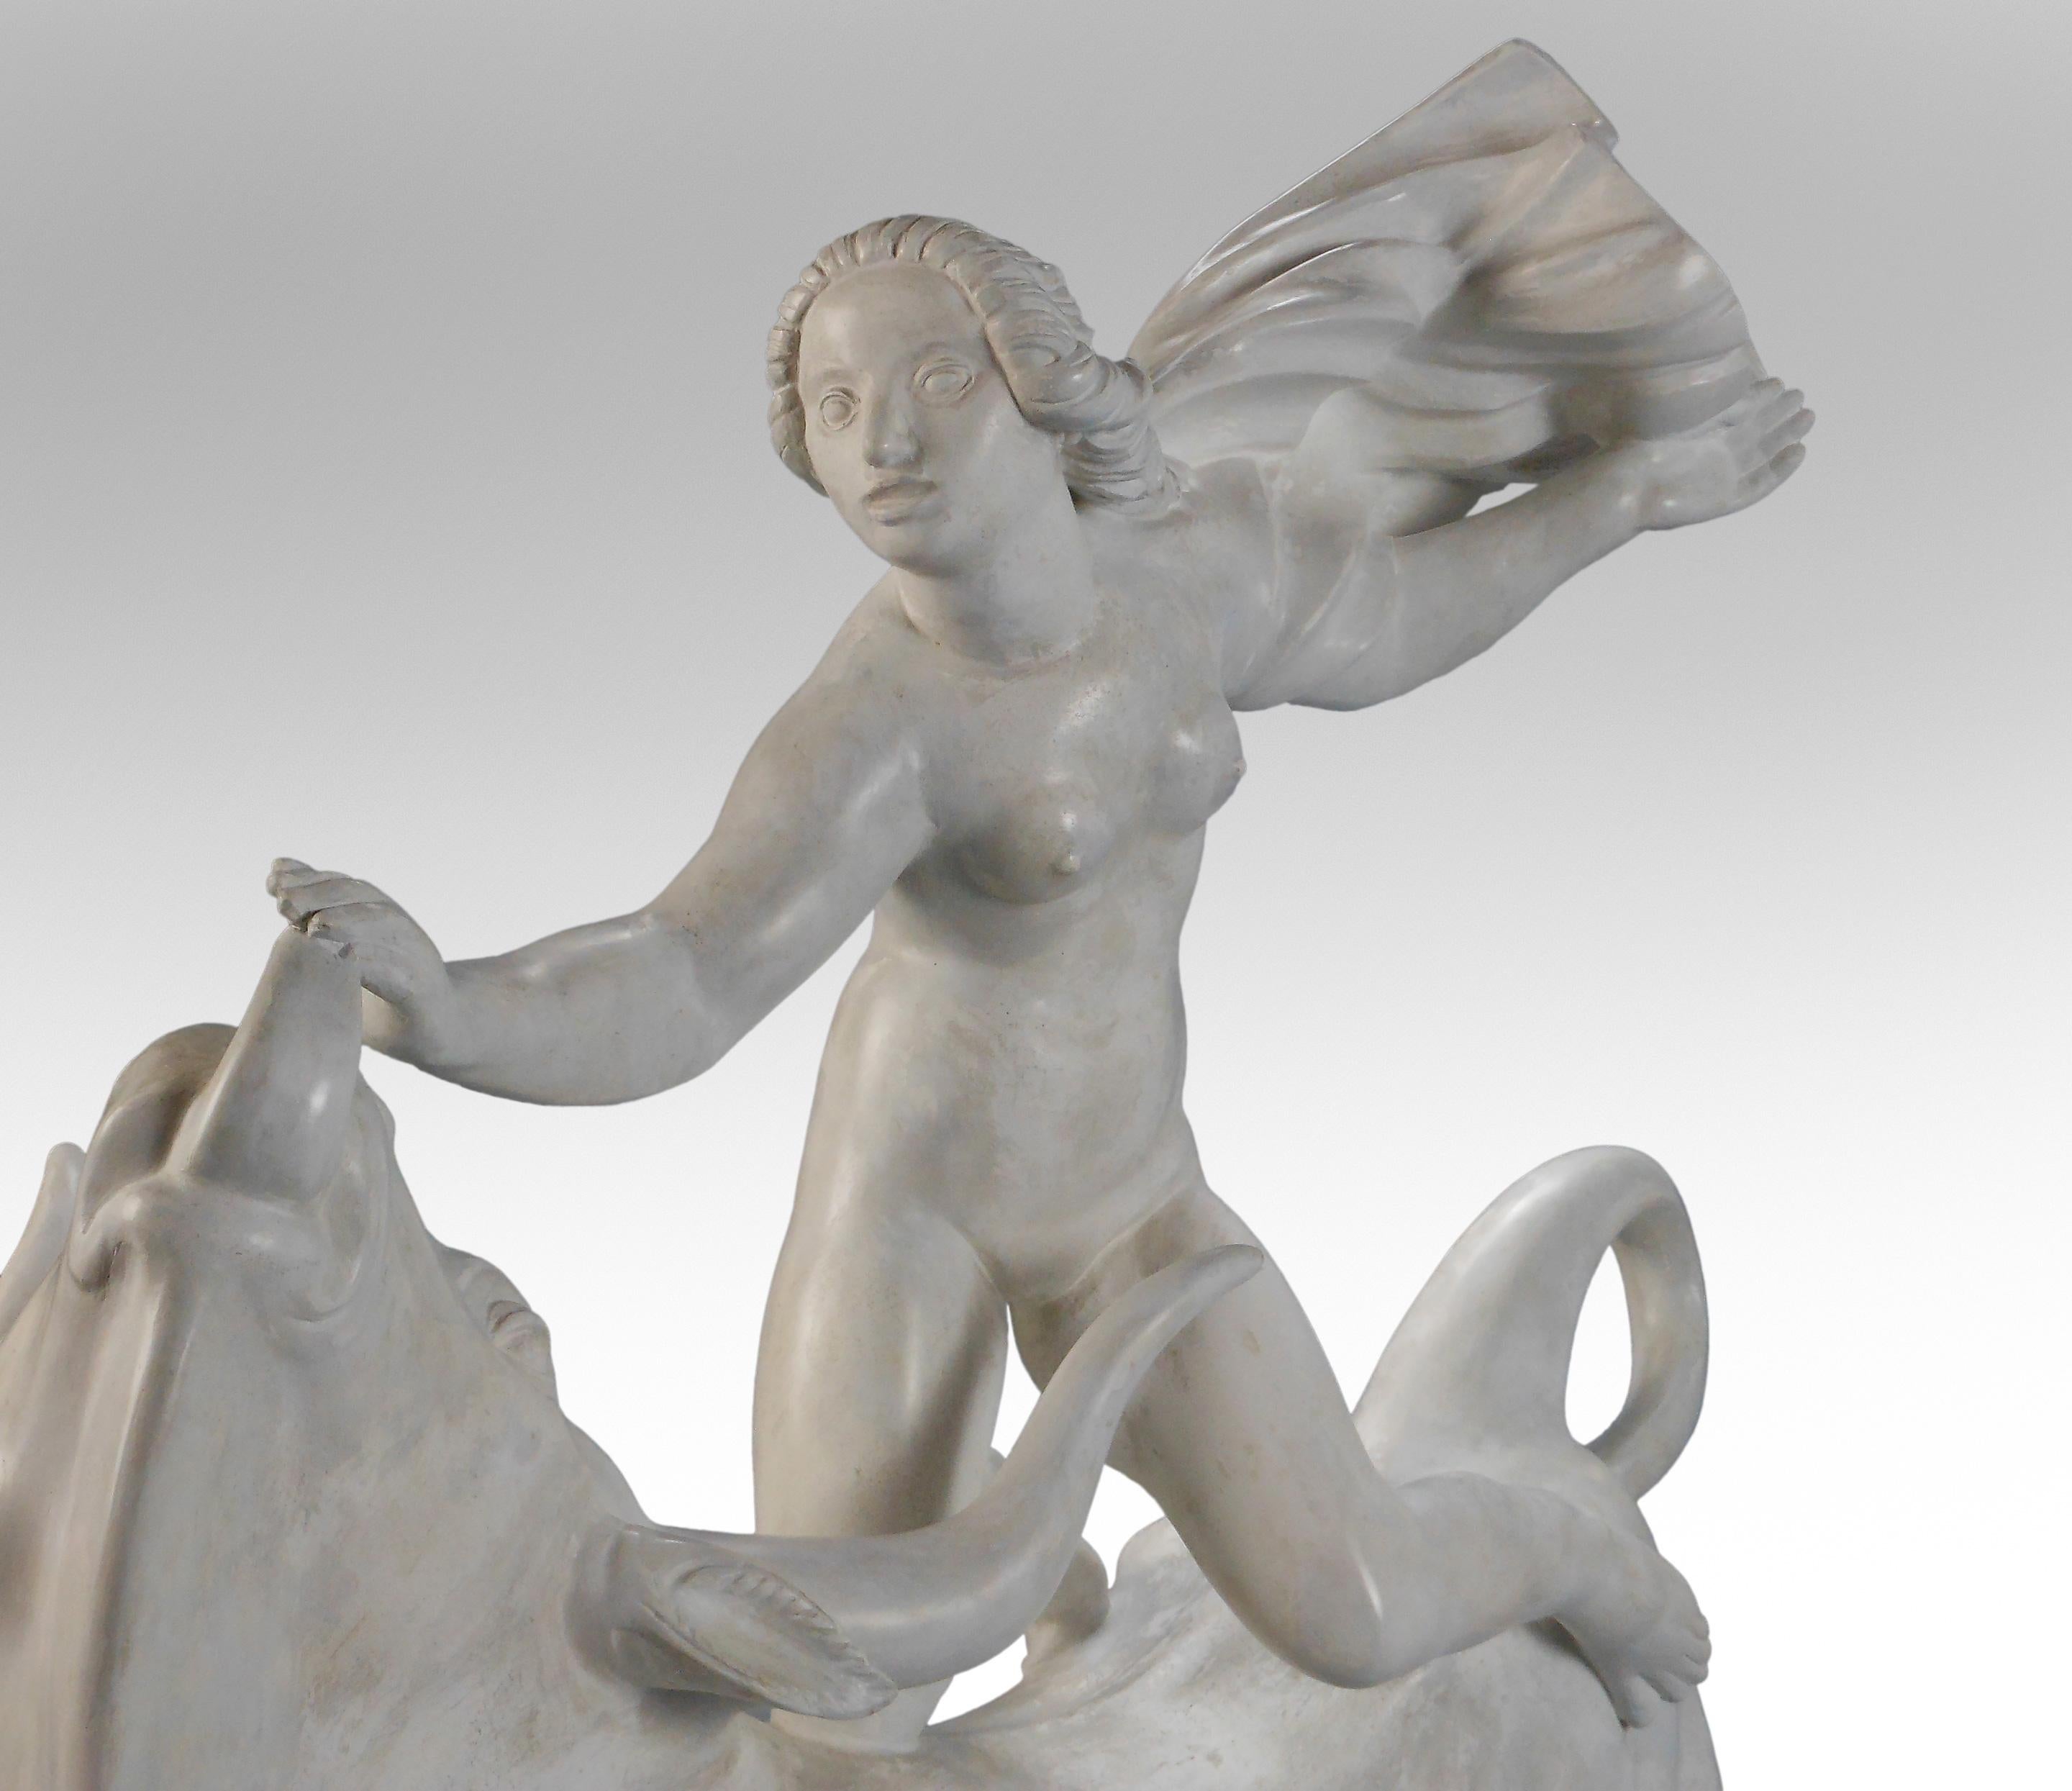 Carl Milles, Rare Plaster Sculpture of Europa and the Bull,
circa 1925
Kneeling astride the vigorous bull, Europa is poised in flight, her cloak blowing in the wind, raised on a rectangular contoured base with foliate frieze.
Europa and the Bull